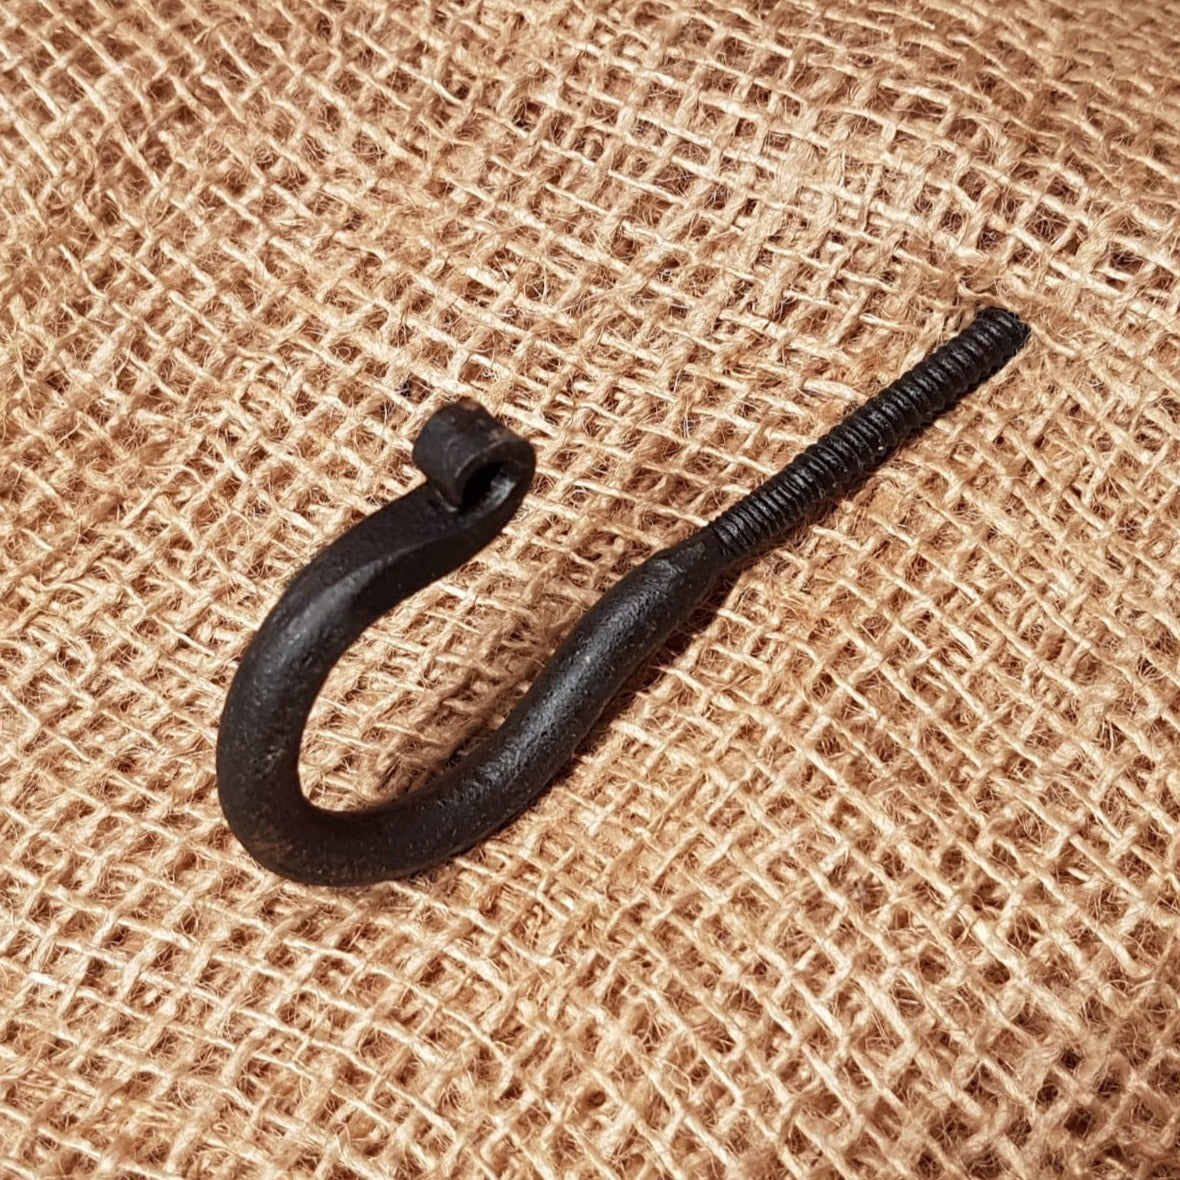 Hand Forged 2 Screw-In Hook